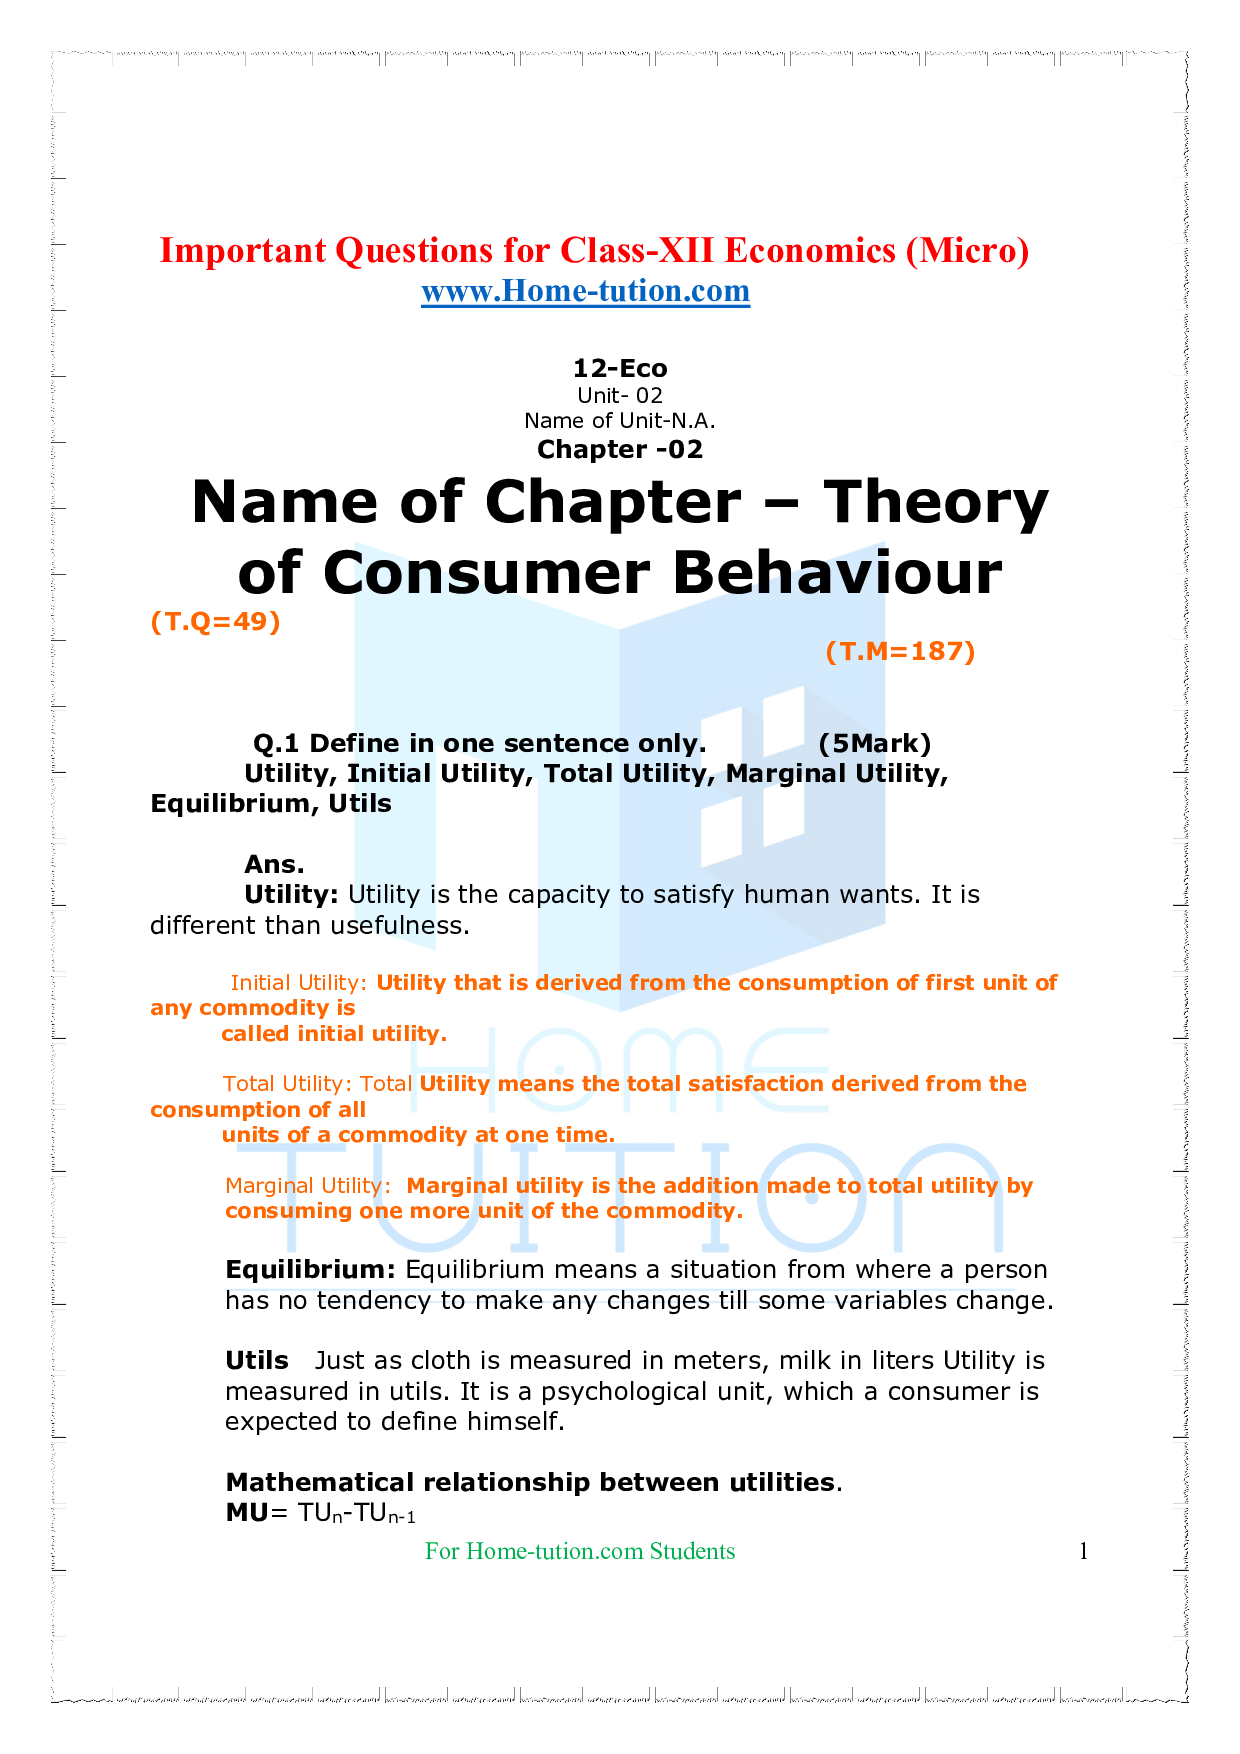 Chapter-2 Theory of Consumer Behaviour Questions